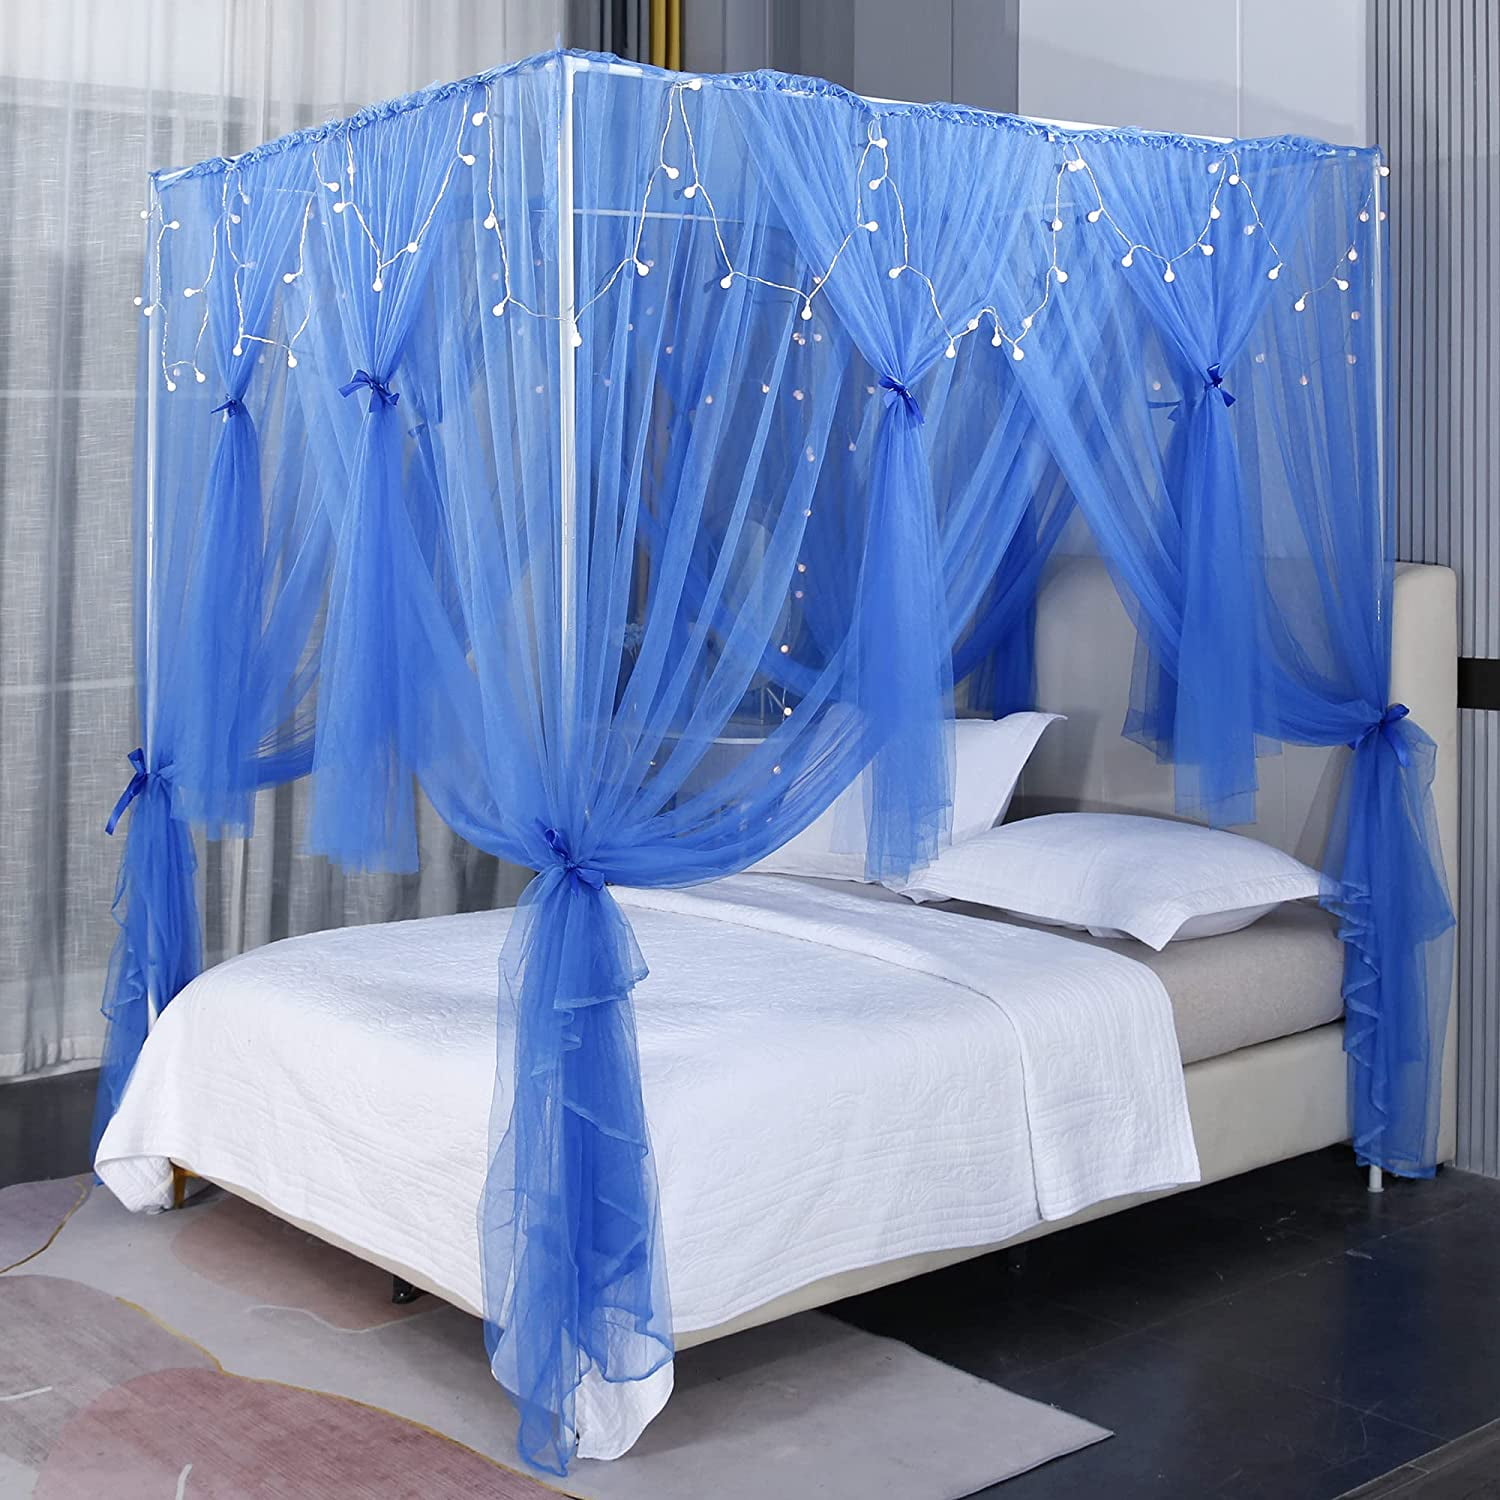 Nattey 4 Poster Corners Princess Bed Curtain Canopy Netting Canopies Twin Blue